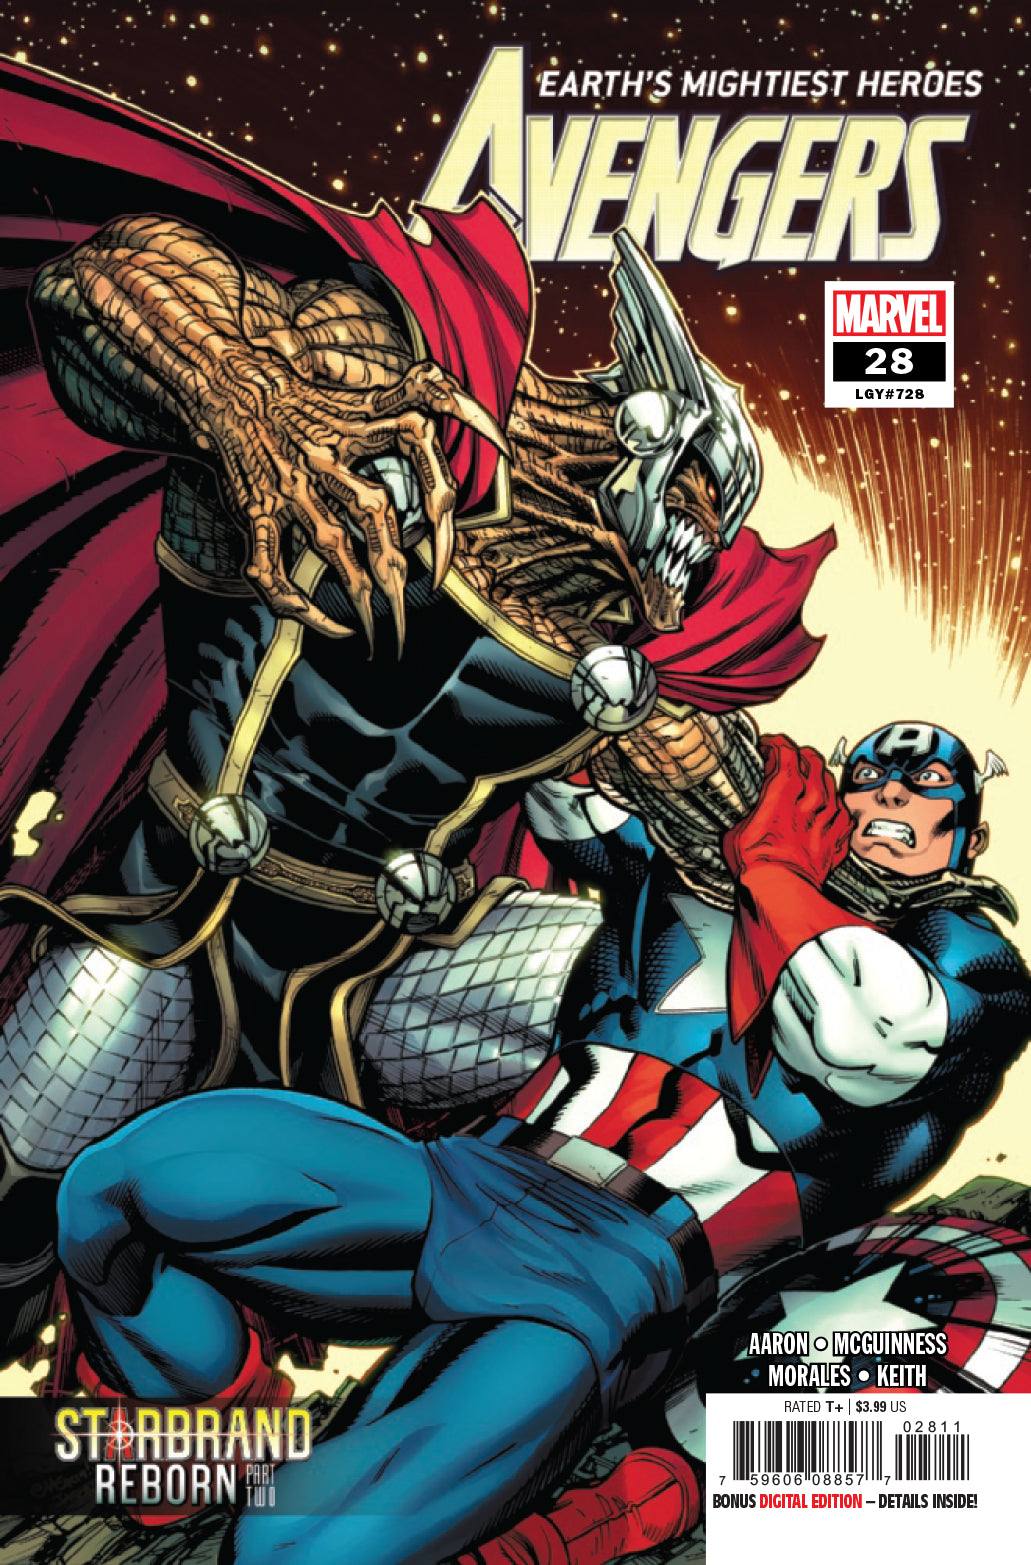 AVENGERS #28 | Game Master's Emporium (The New GME)